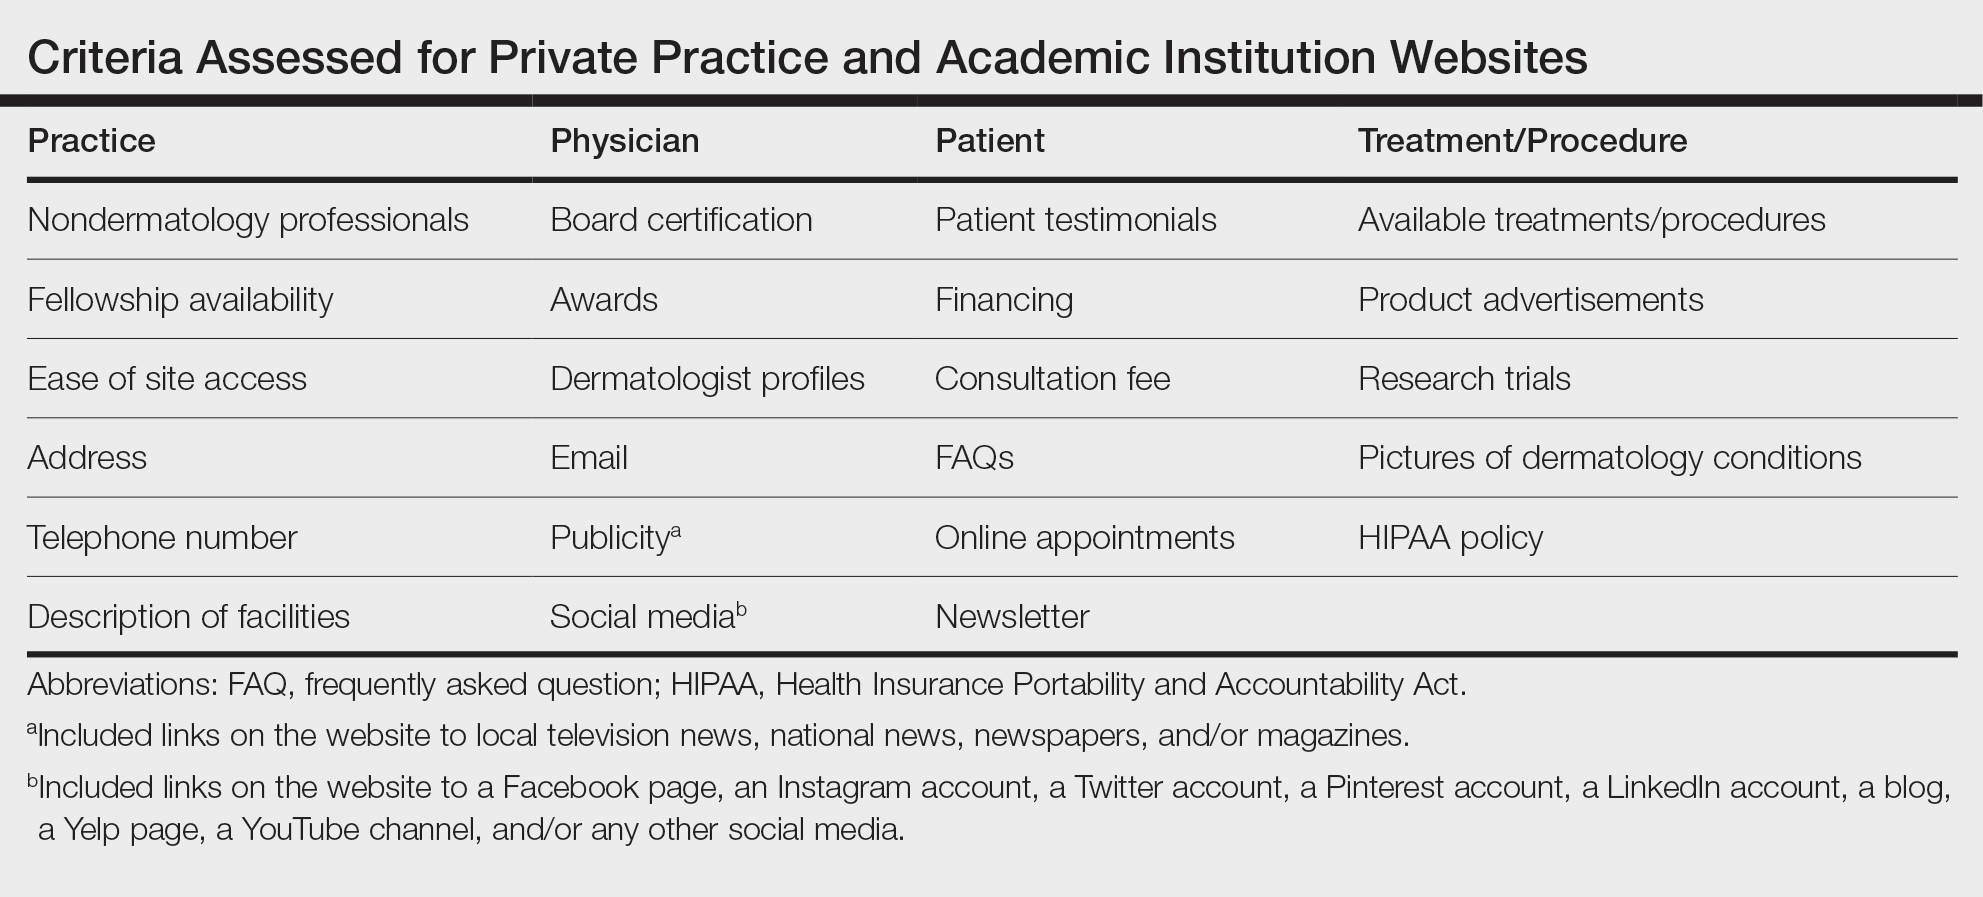 Criteria Assessed for Private Practice and Academic Institution Websites